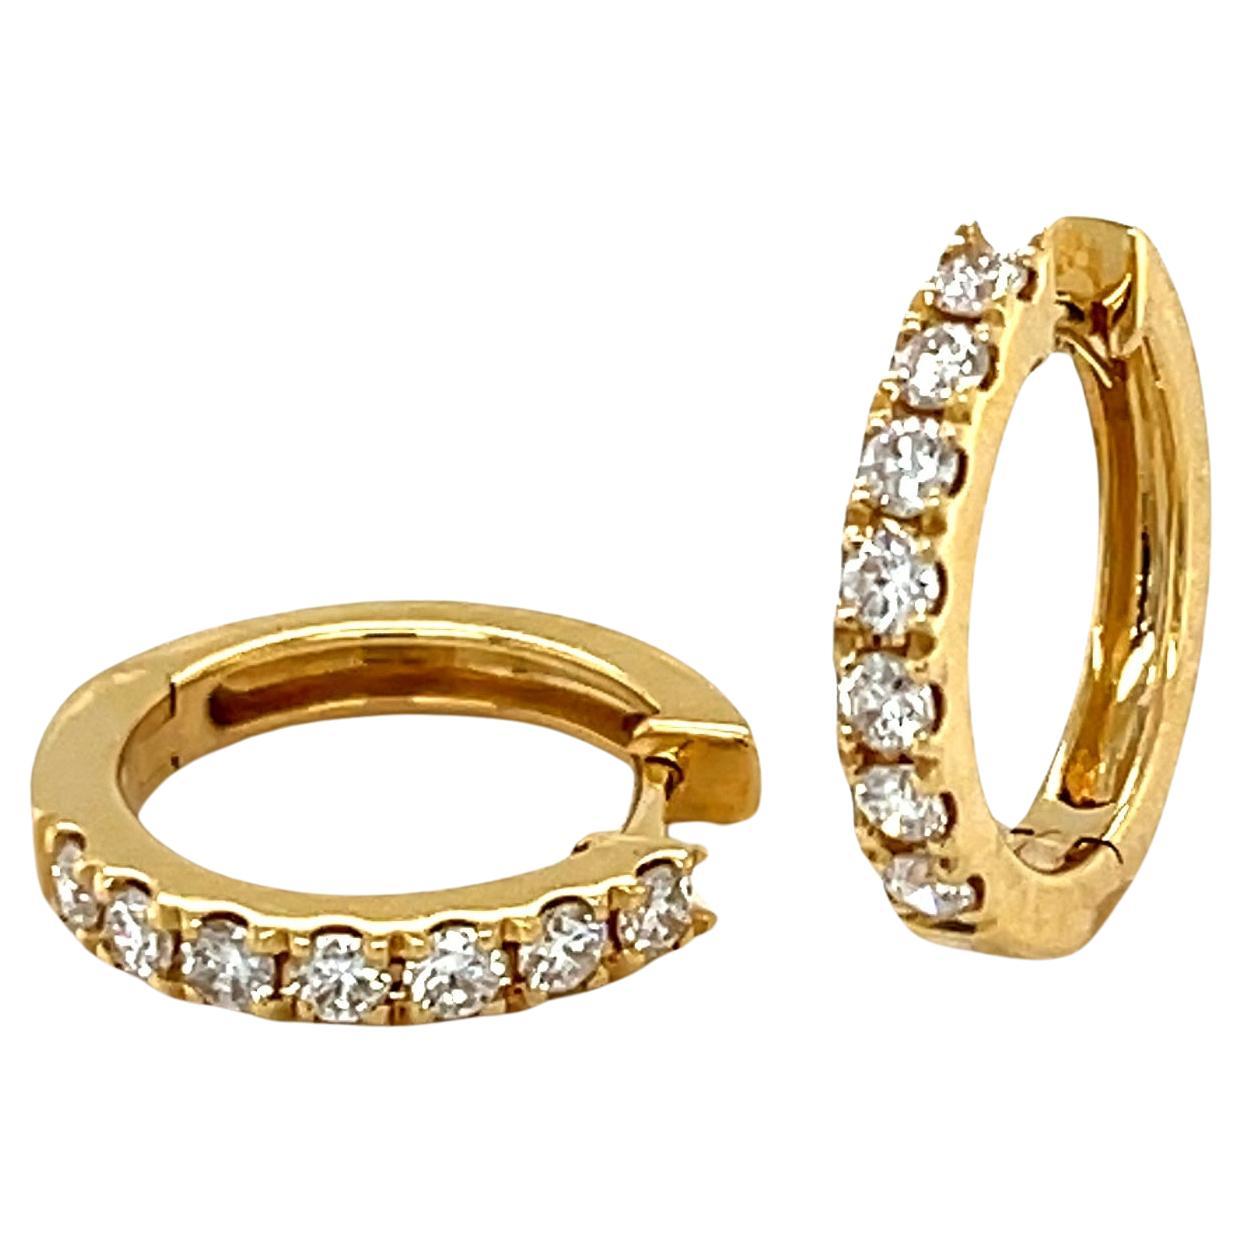 Diamond Hoop Earrings in 18k Yellow Gold with Hinged Backs, .48 Carats Total For Sale